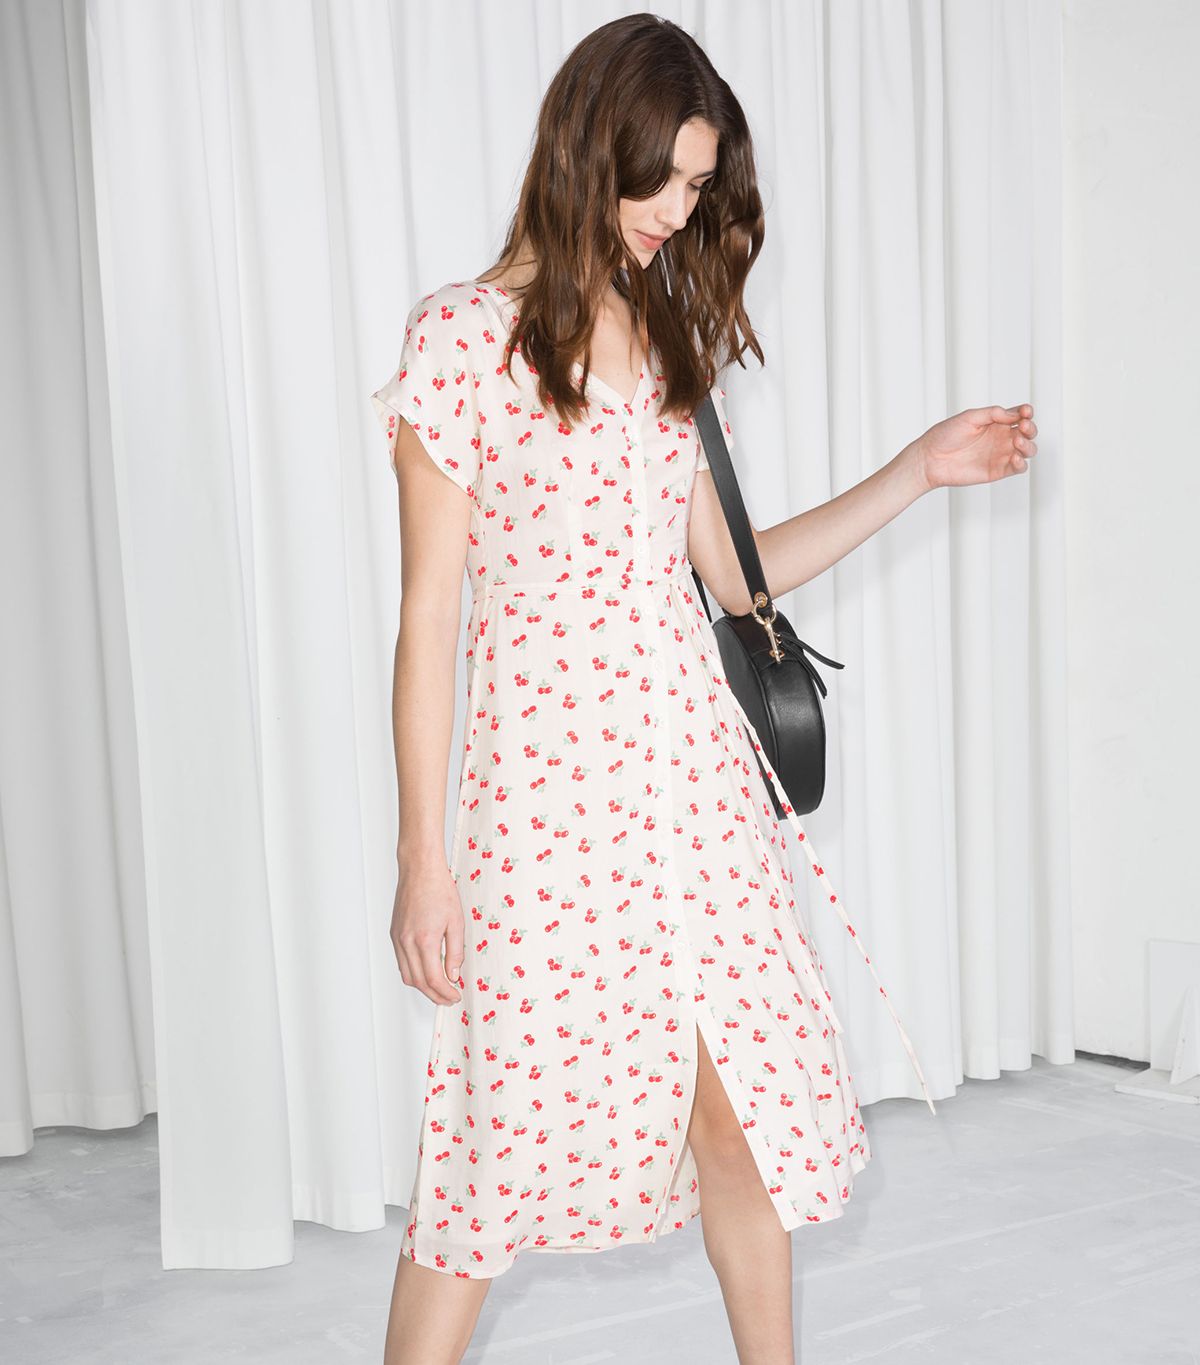 The Cherry-Print Dresses I Have My Eye on Right Now | Who What Wear